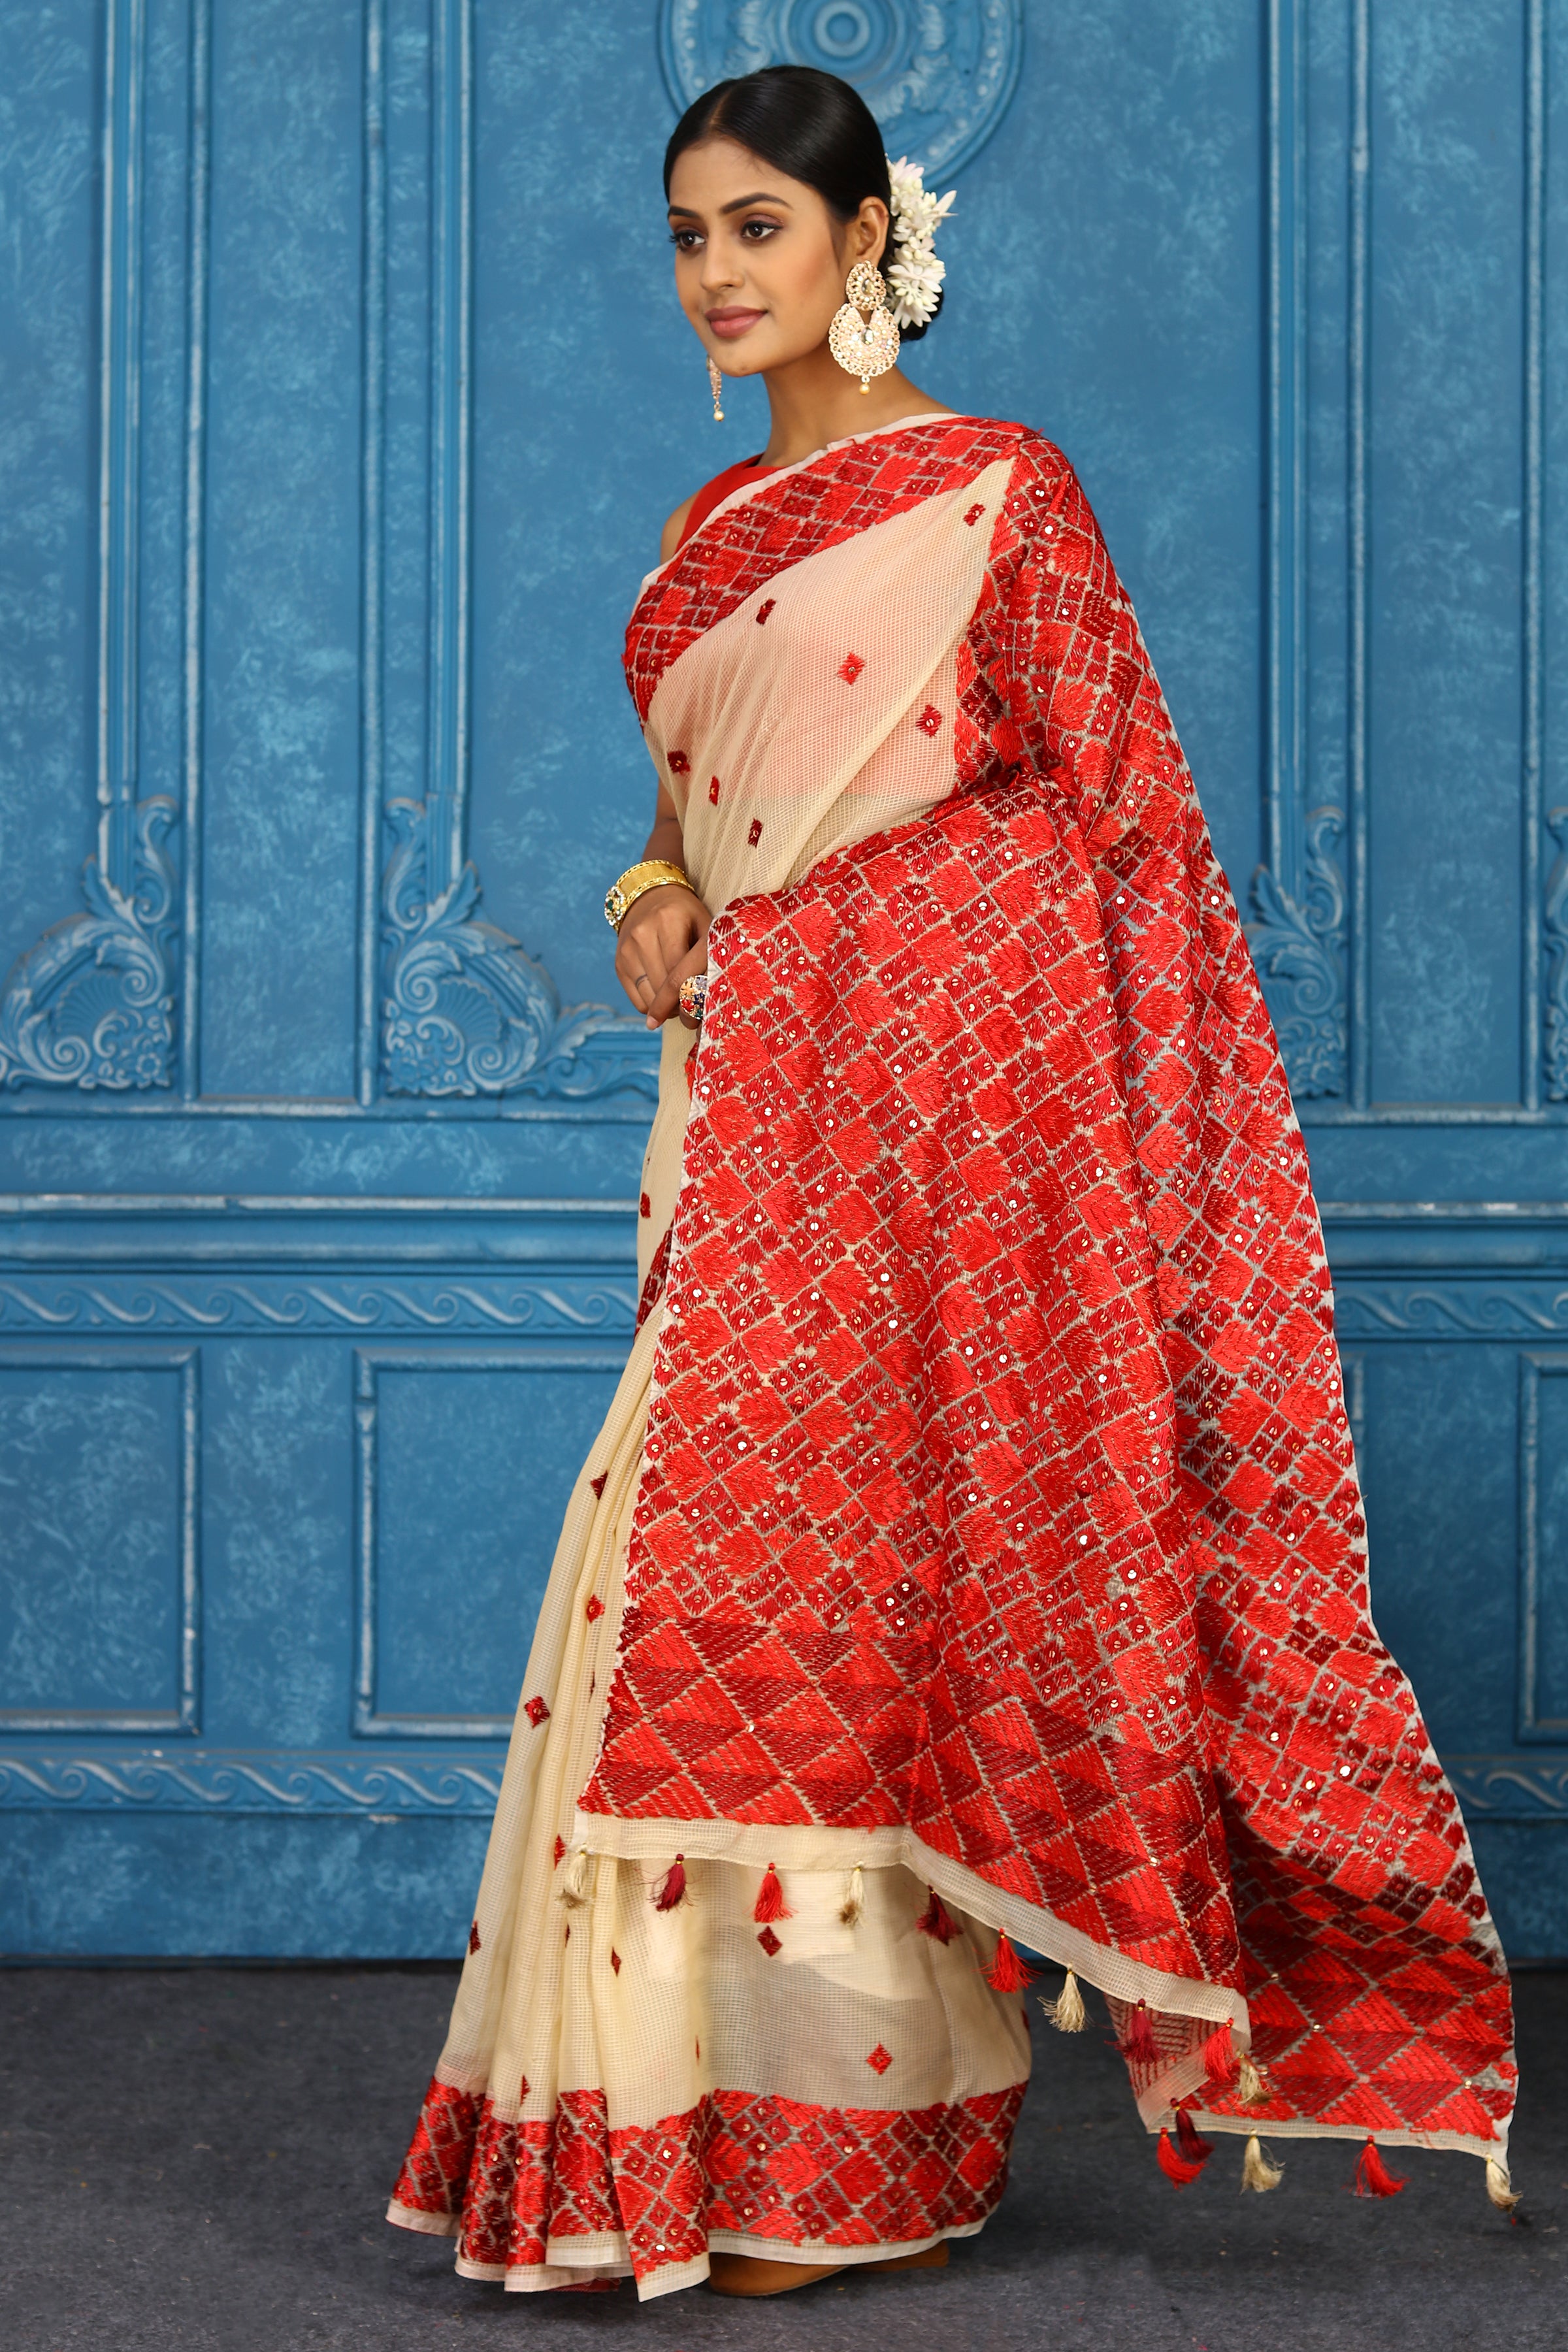 Shop cream red phulkari embroidery sari online in USA. Look your best on festive occasions in latest designer sarees, pure silk sarees, Kanchipuram sarees, handwoven sarees, tussar silk sarees, embroidered sarees from Pure Elegance Indian clothing store in USA.-pallu